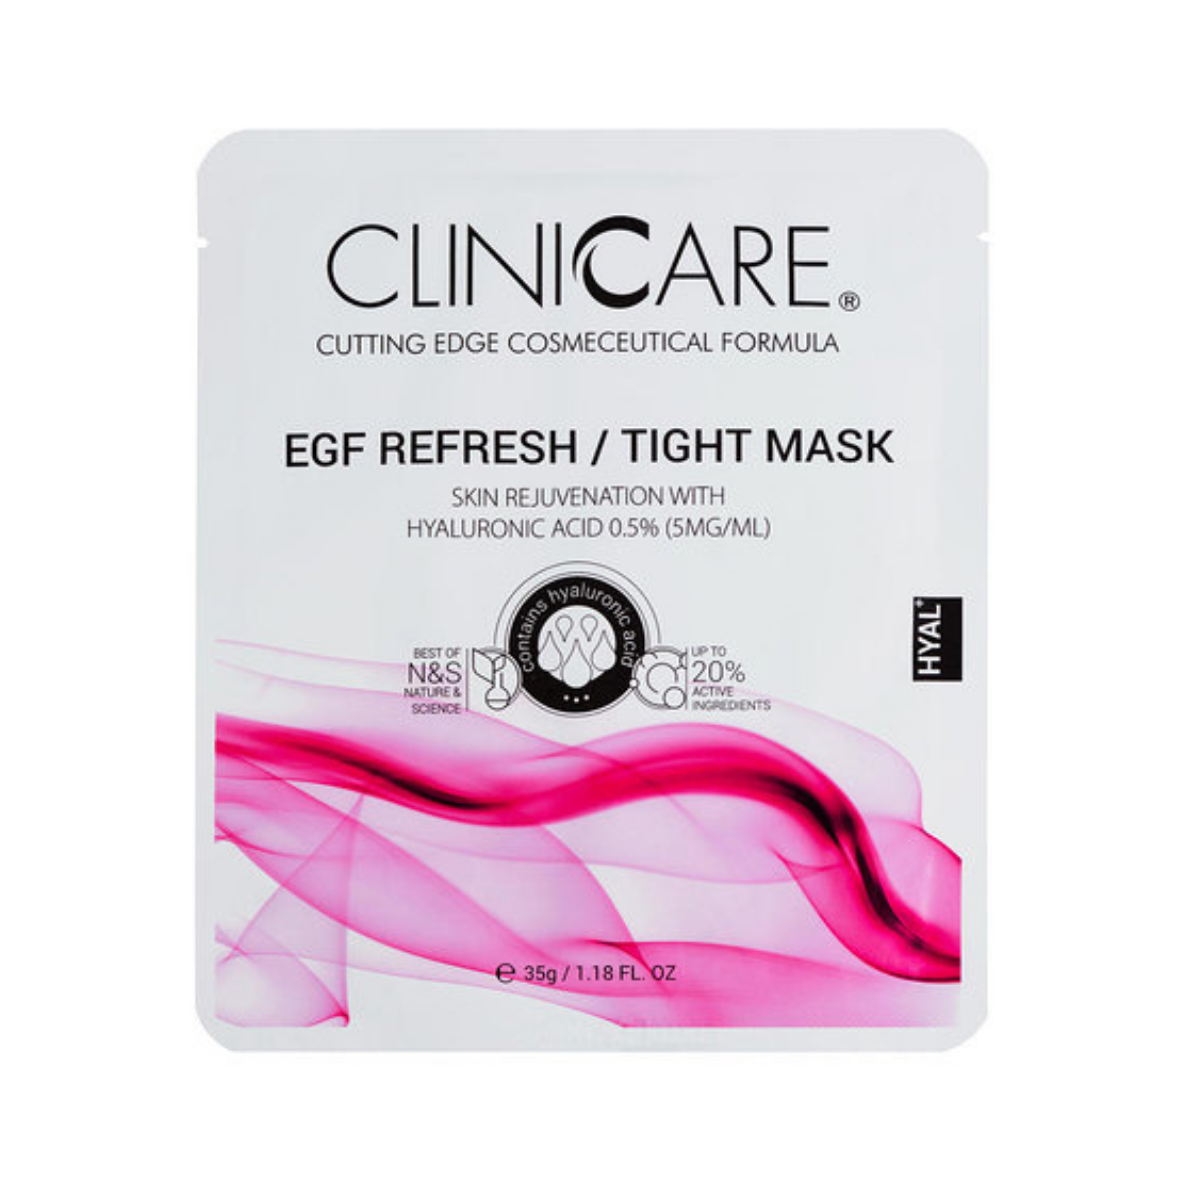 Clinicare EGF Refresh/Tight Mask